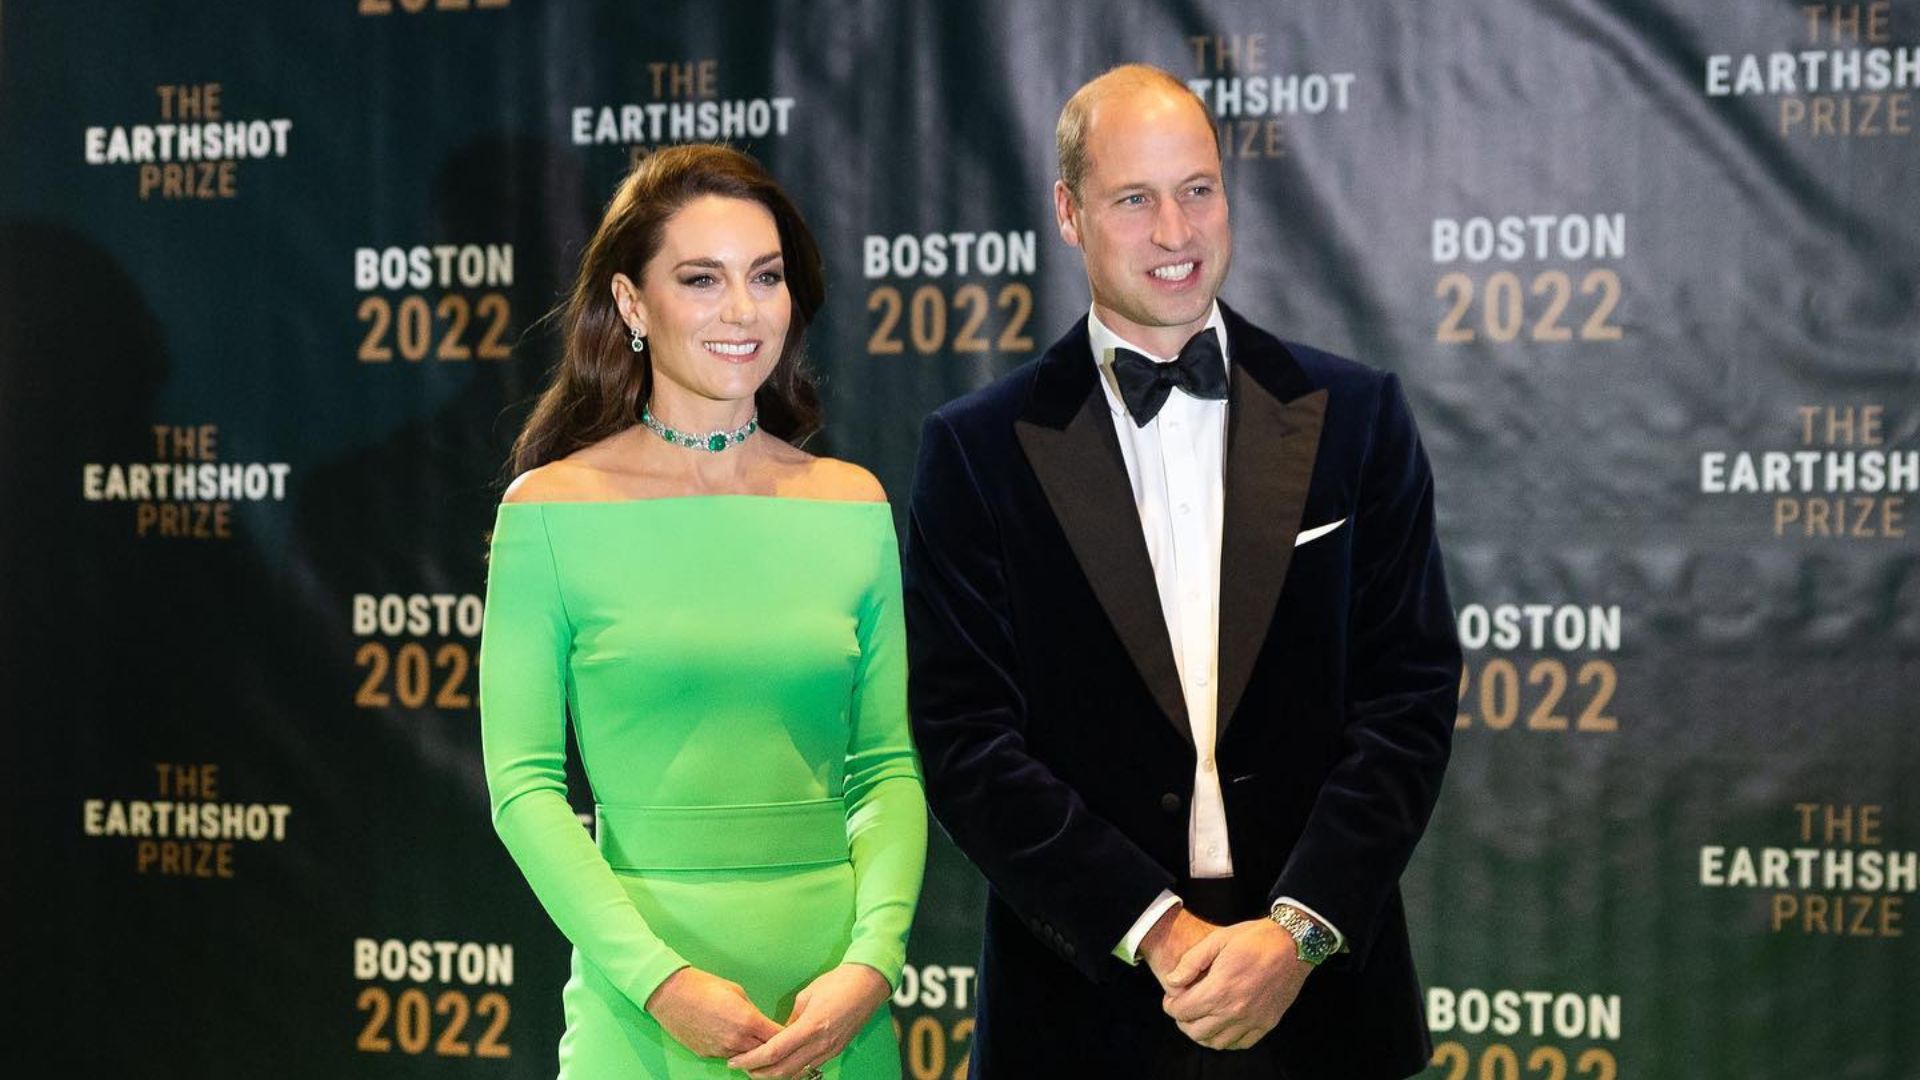 Prince William and Kate Middleton All Set For Earthshot Prize 2023